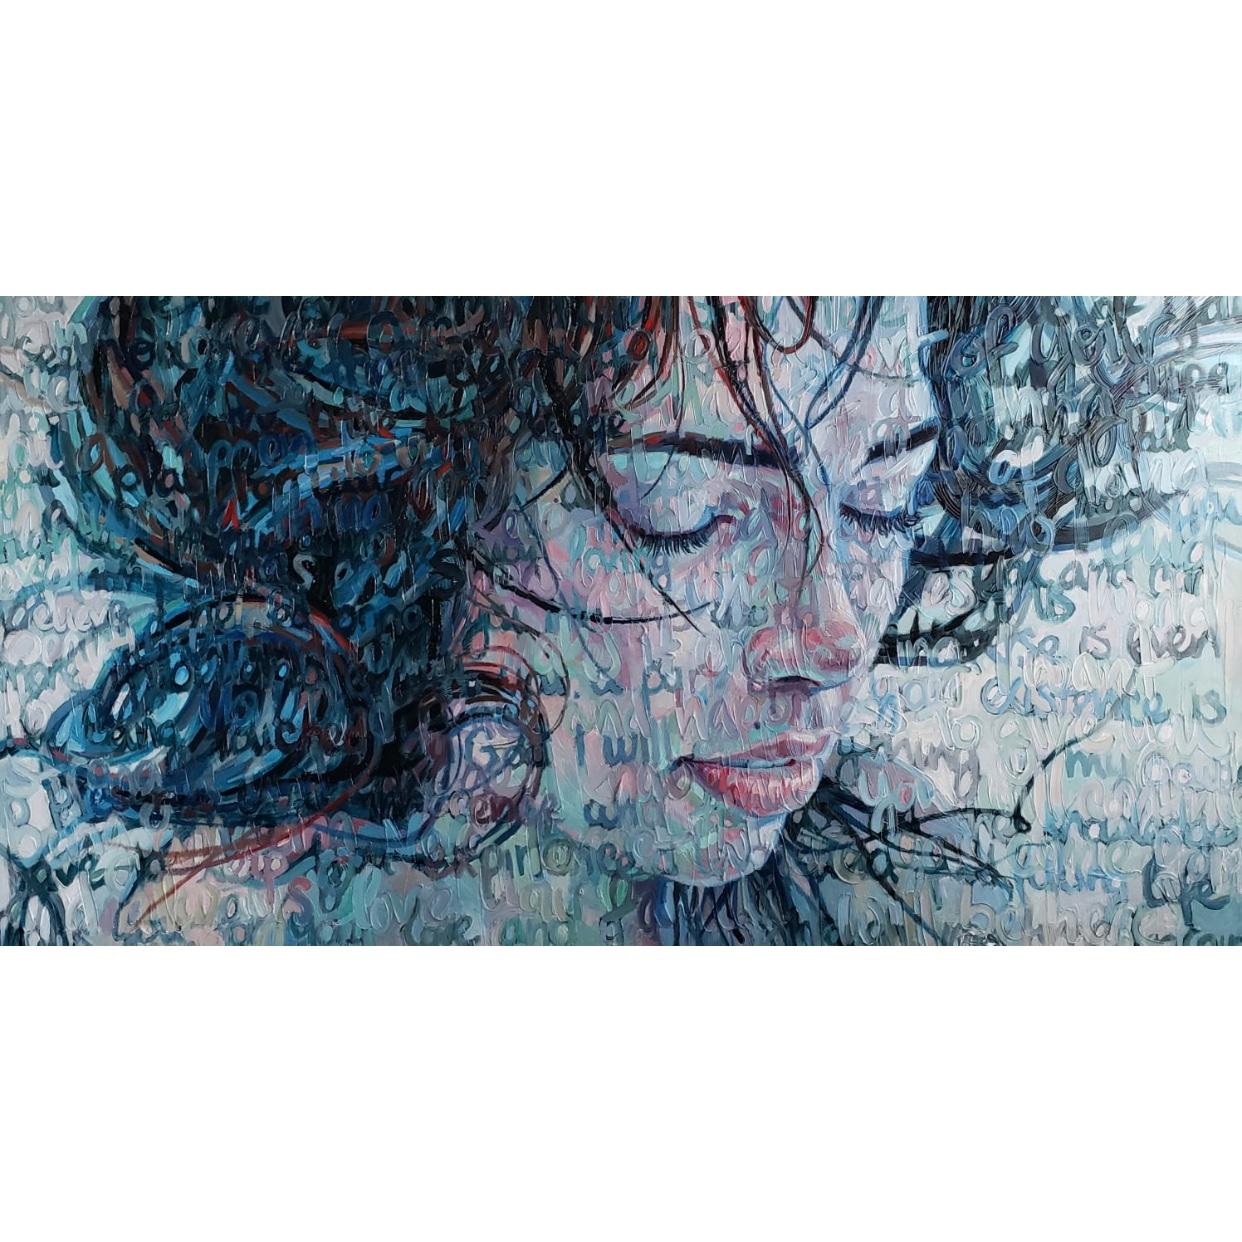 Large Oil Painting Titled: Immersed  - Gray Figurative Painting by Christina Major